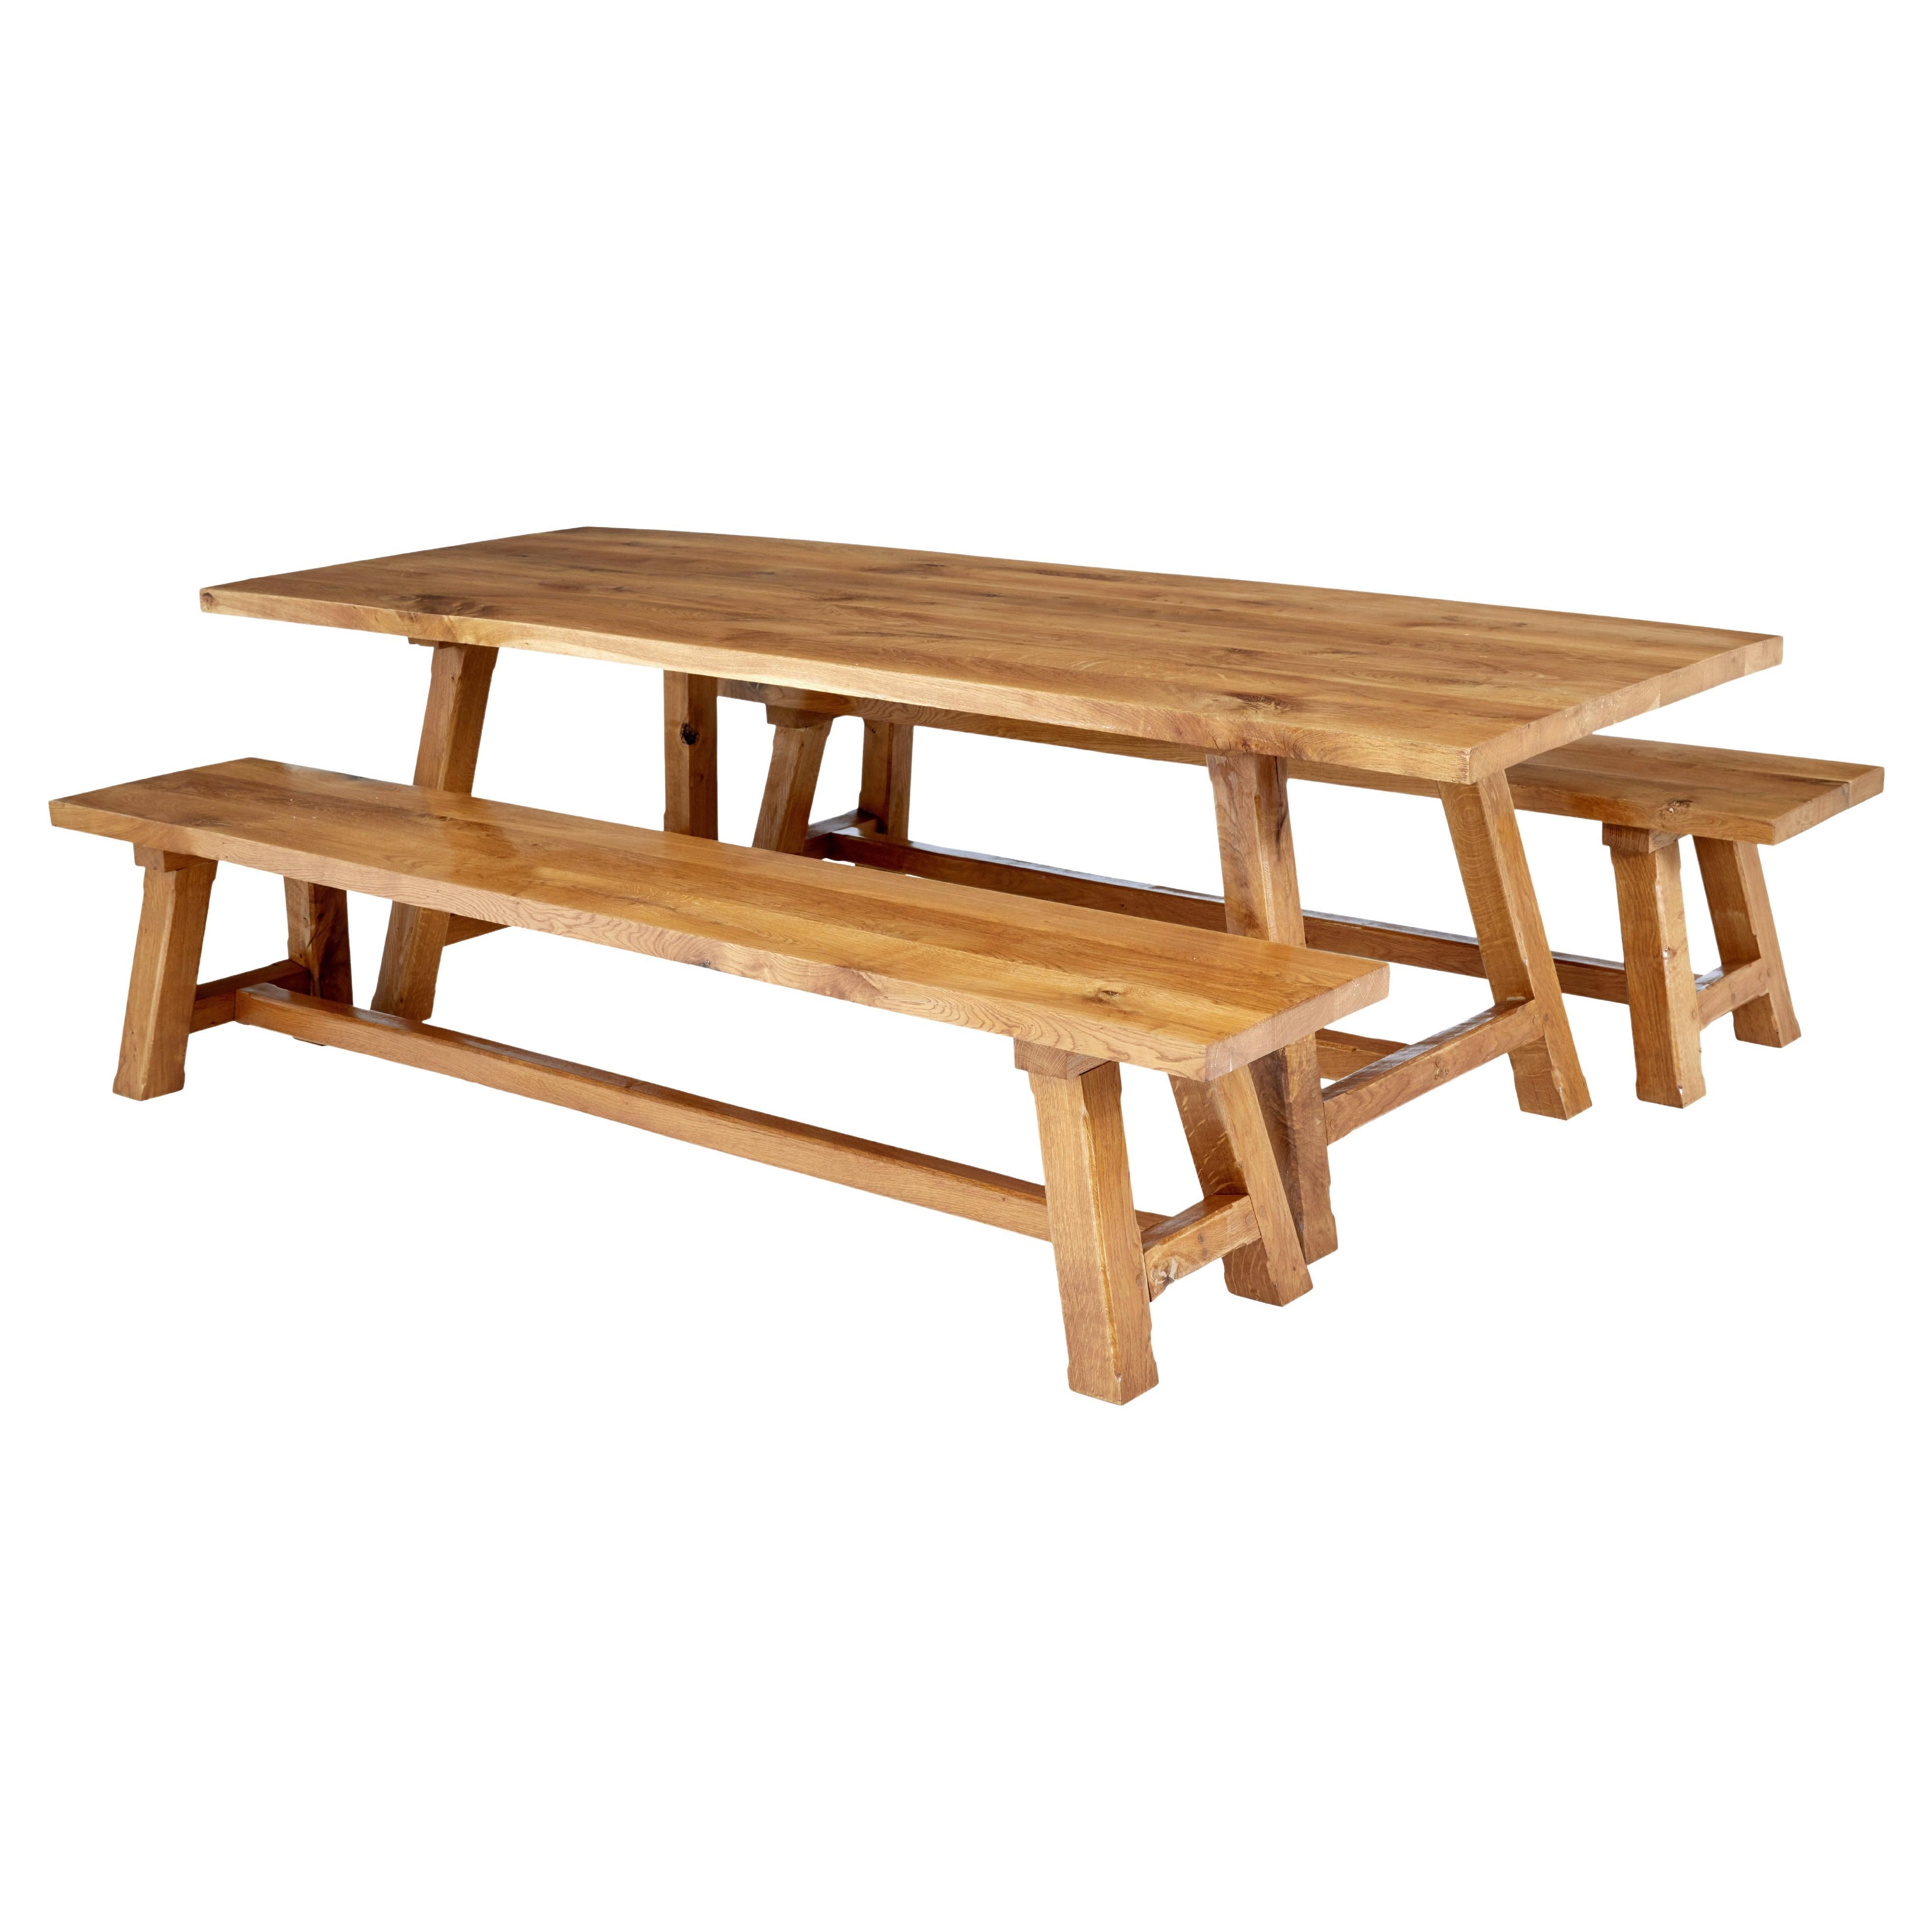 Impressive Solid Oak Dining Table and Benches by Garbo